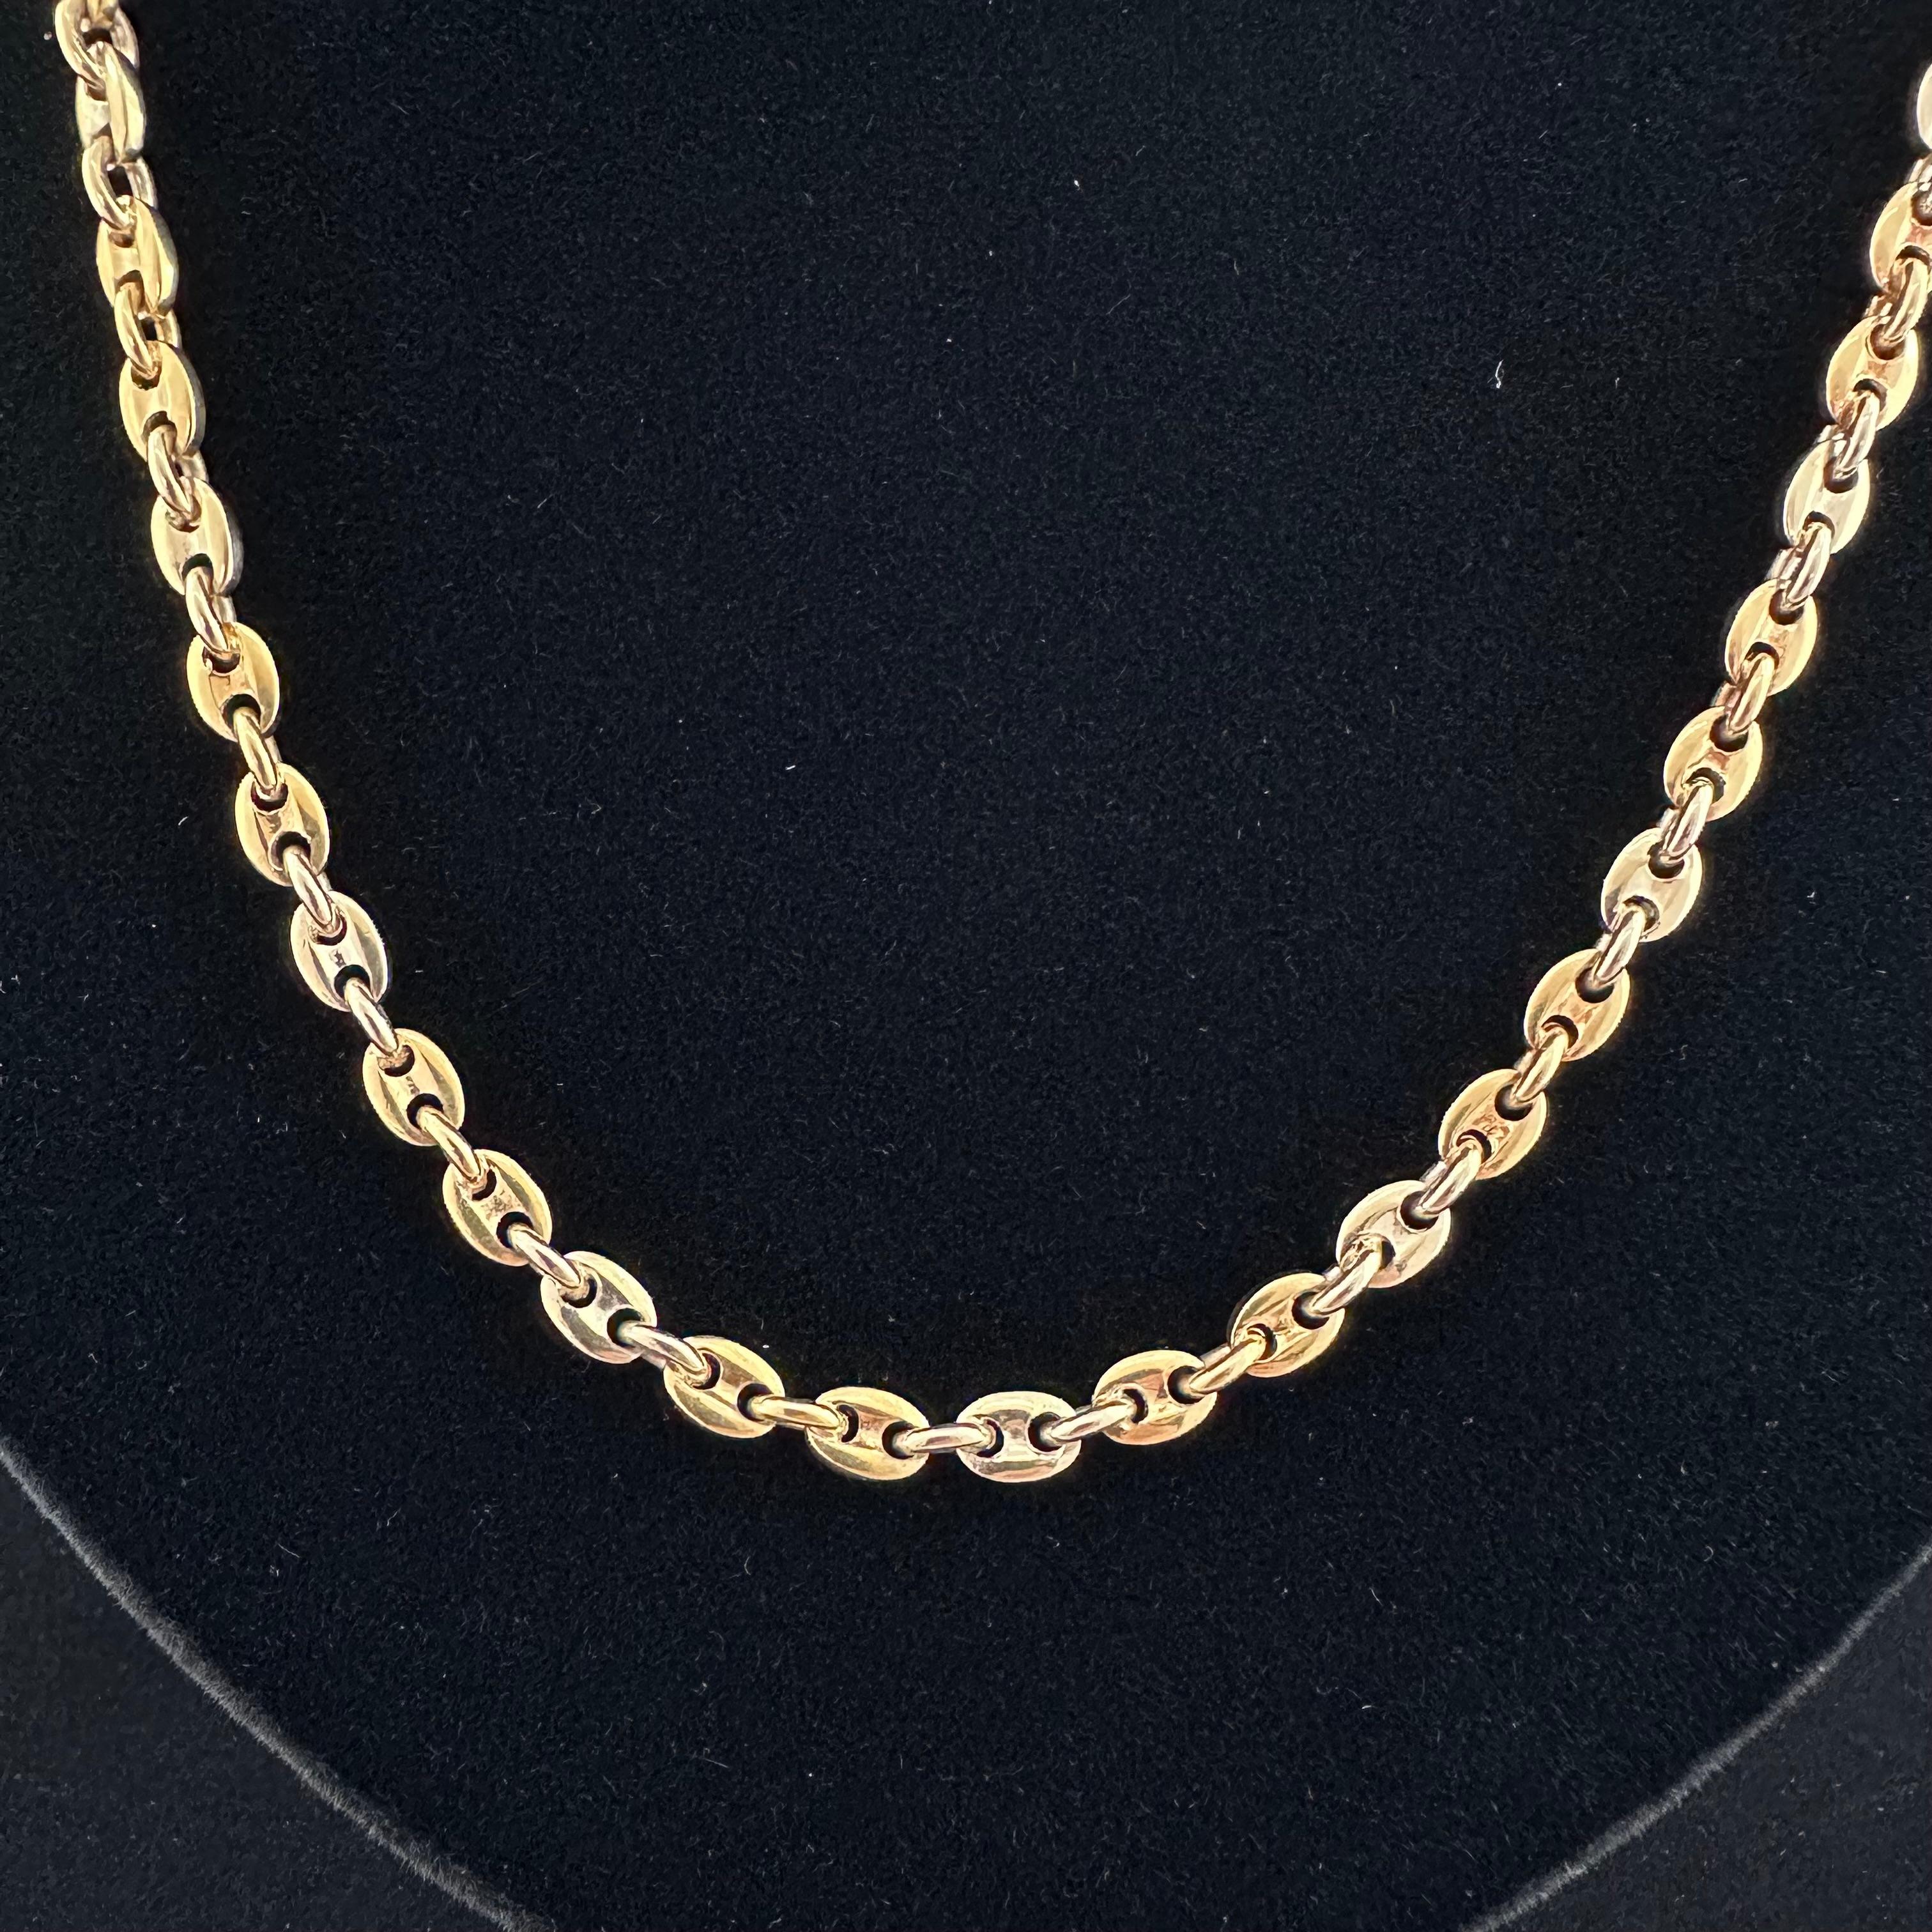 Cartier Marine Link Chain 18k Gold For Sale 1